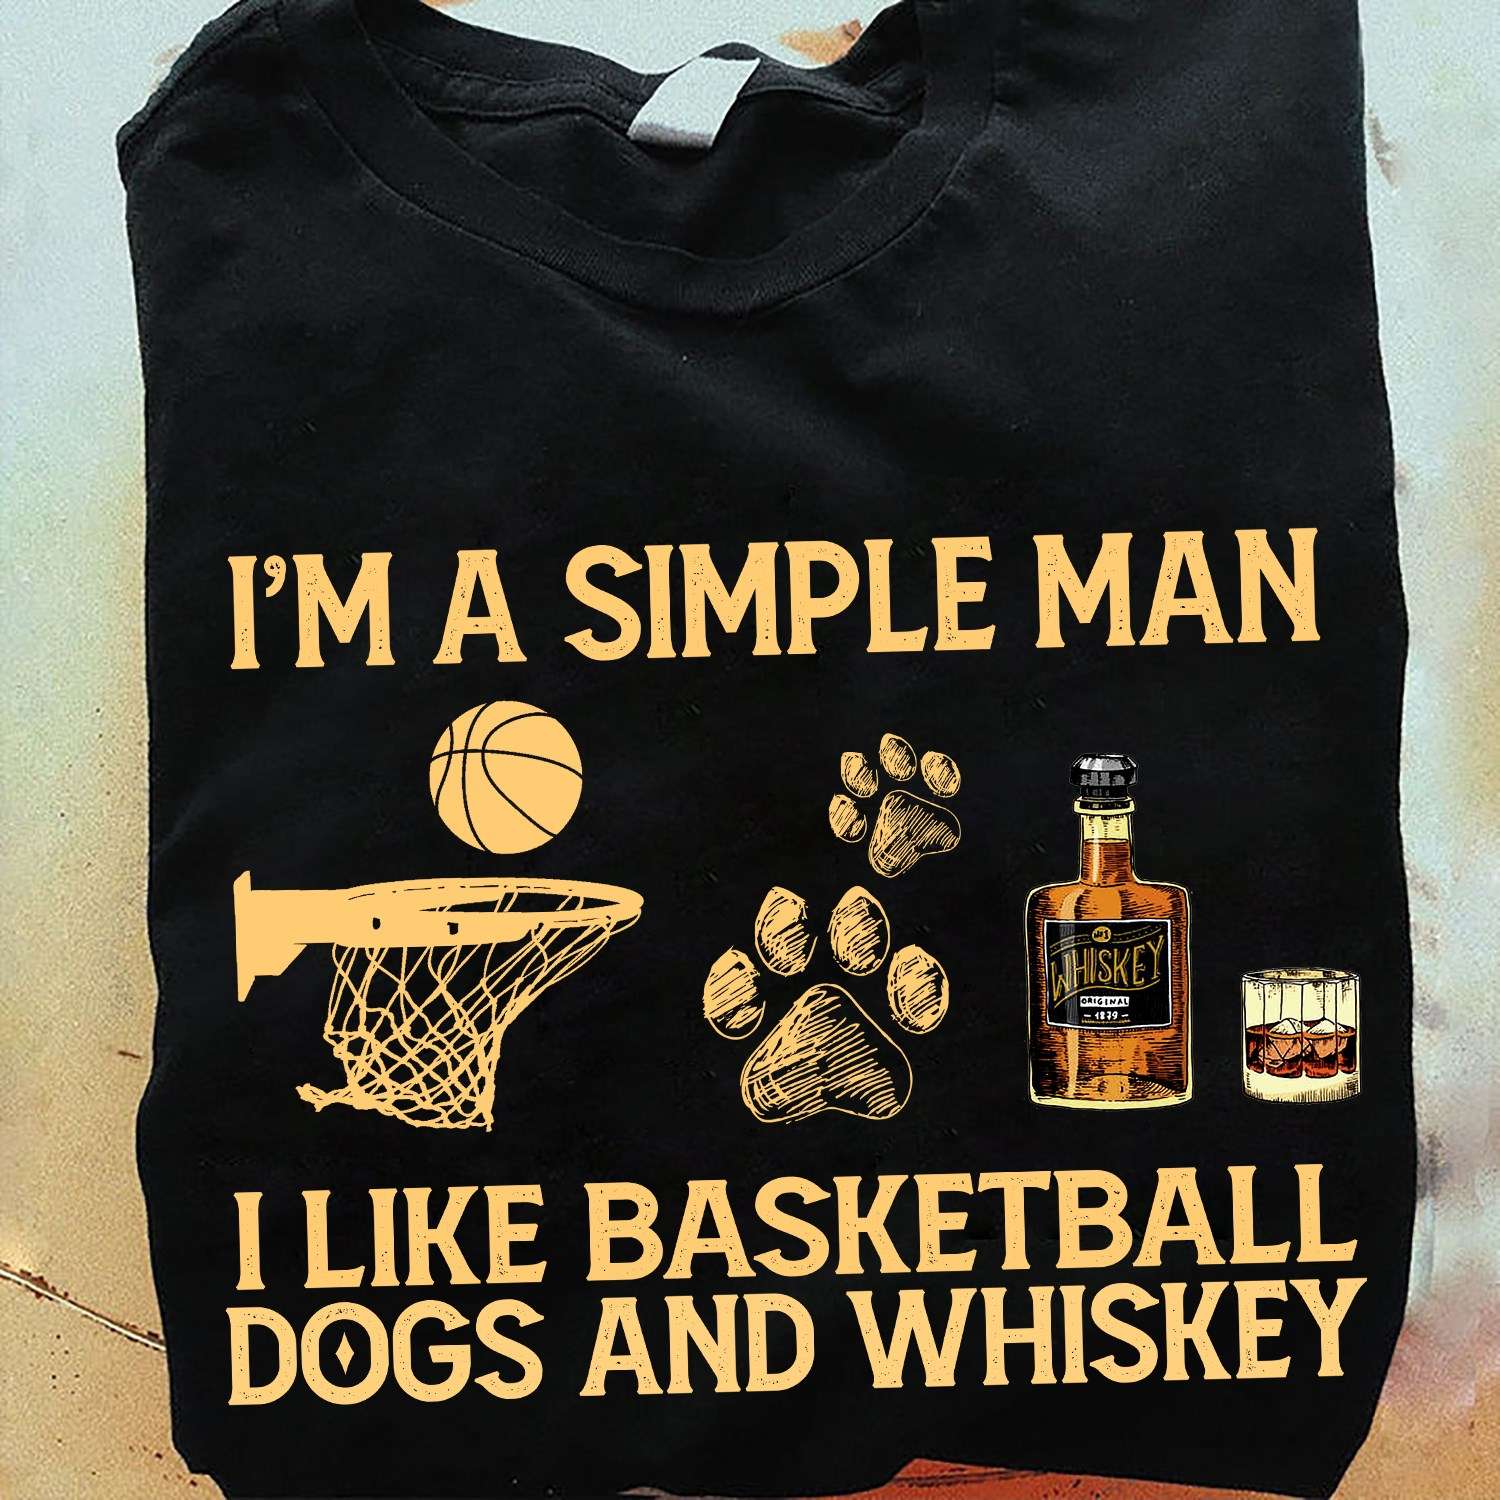 Basketball Dogs And Whiskey - I'm a simple man i like basketball dogs and whiskey